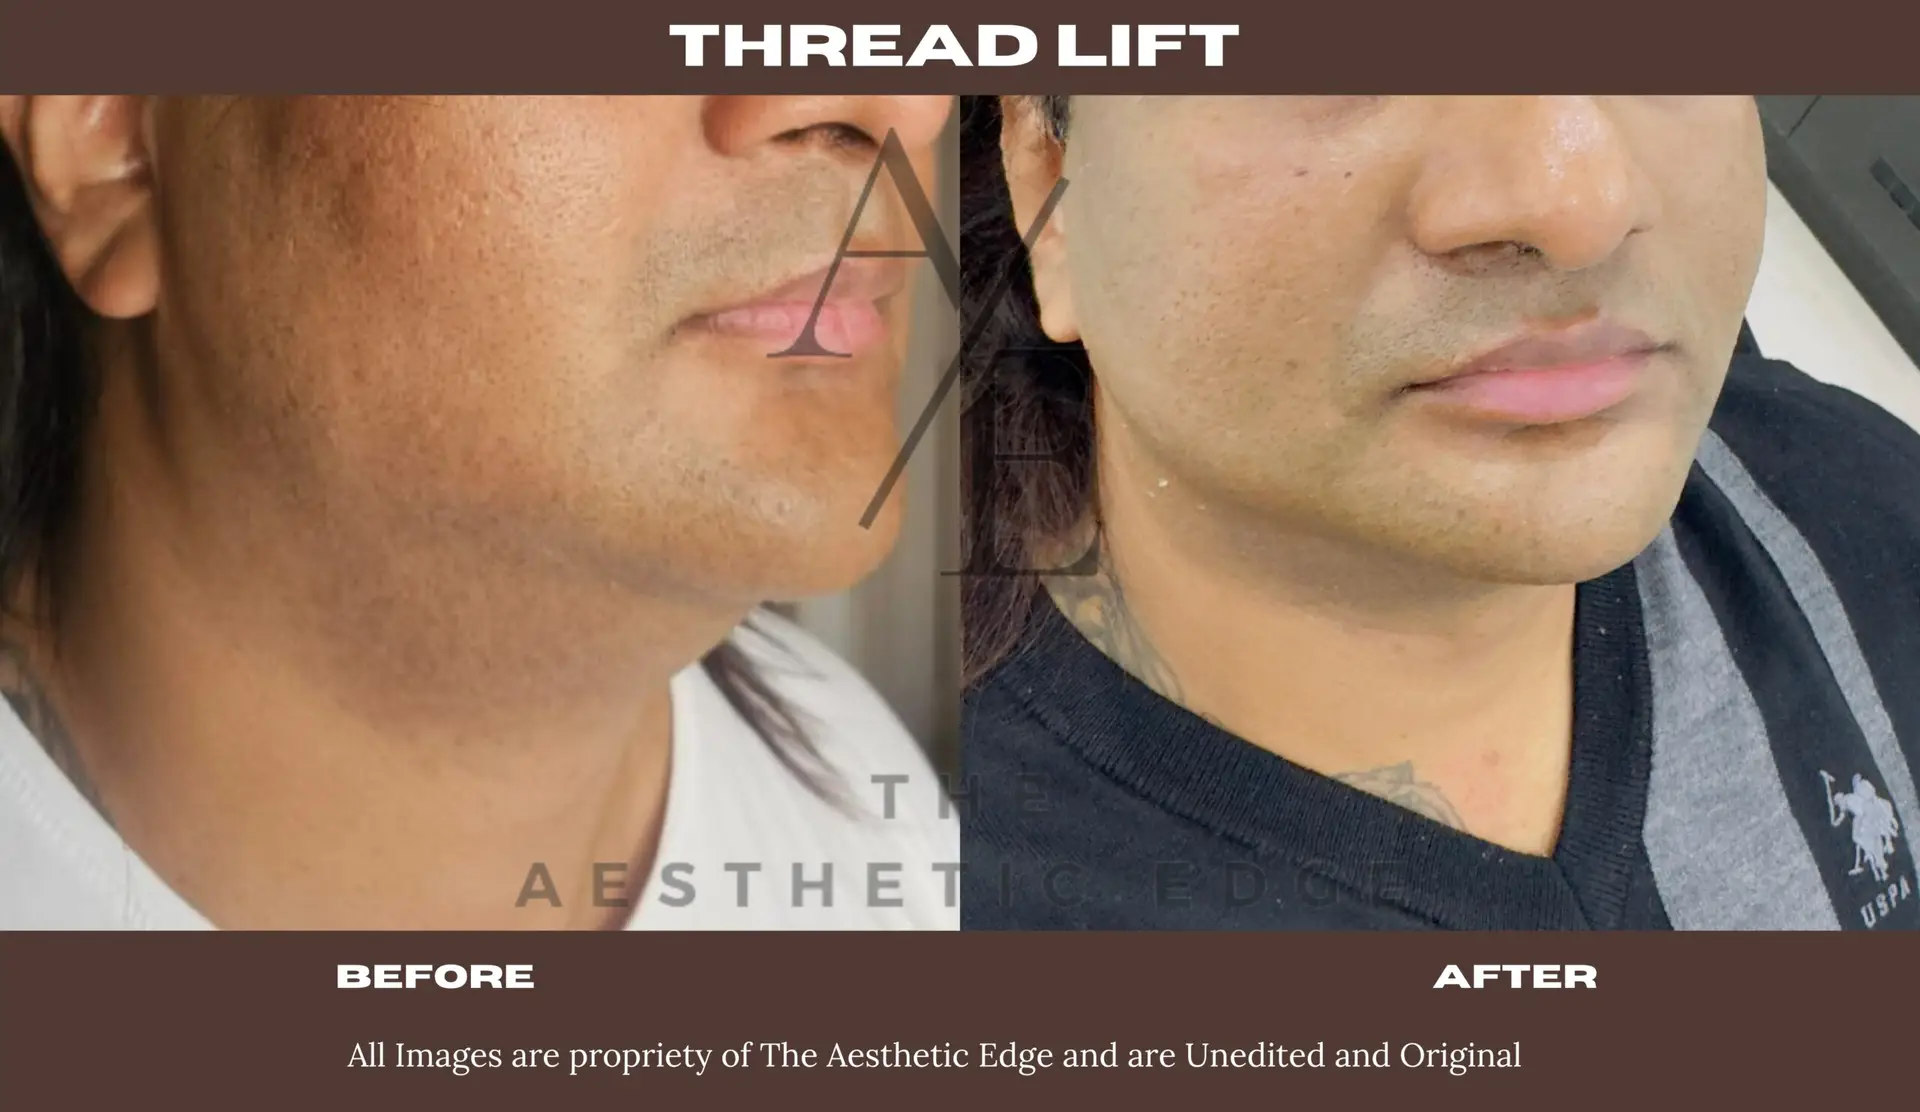 Thread lift - Before After